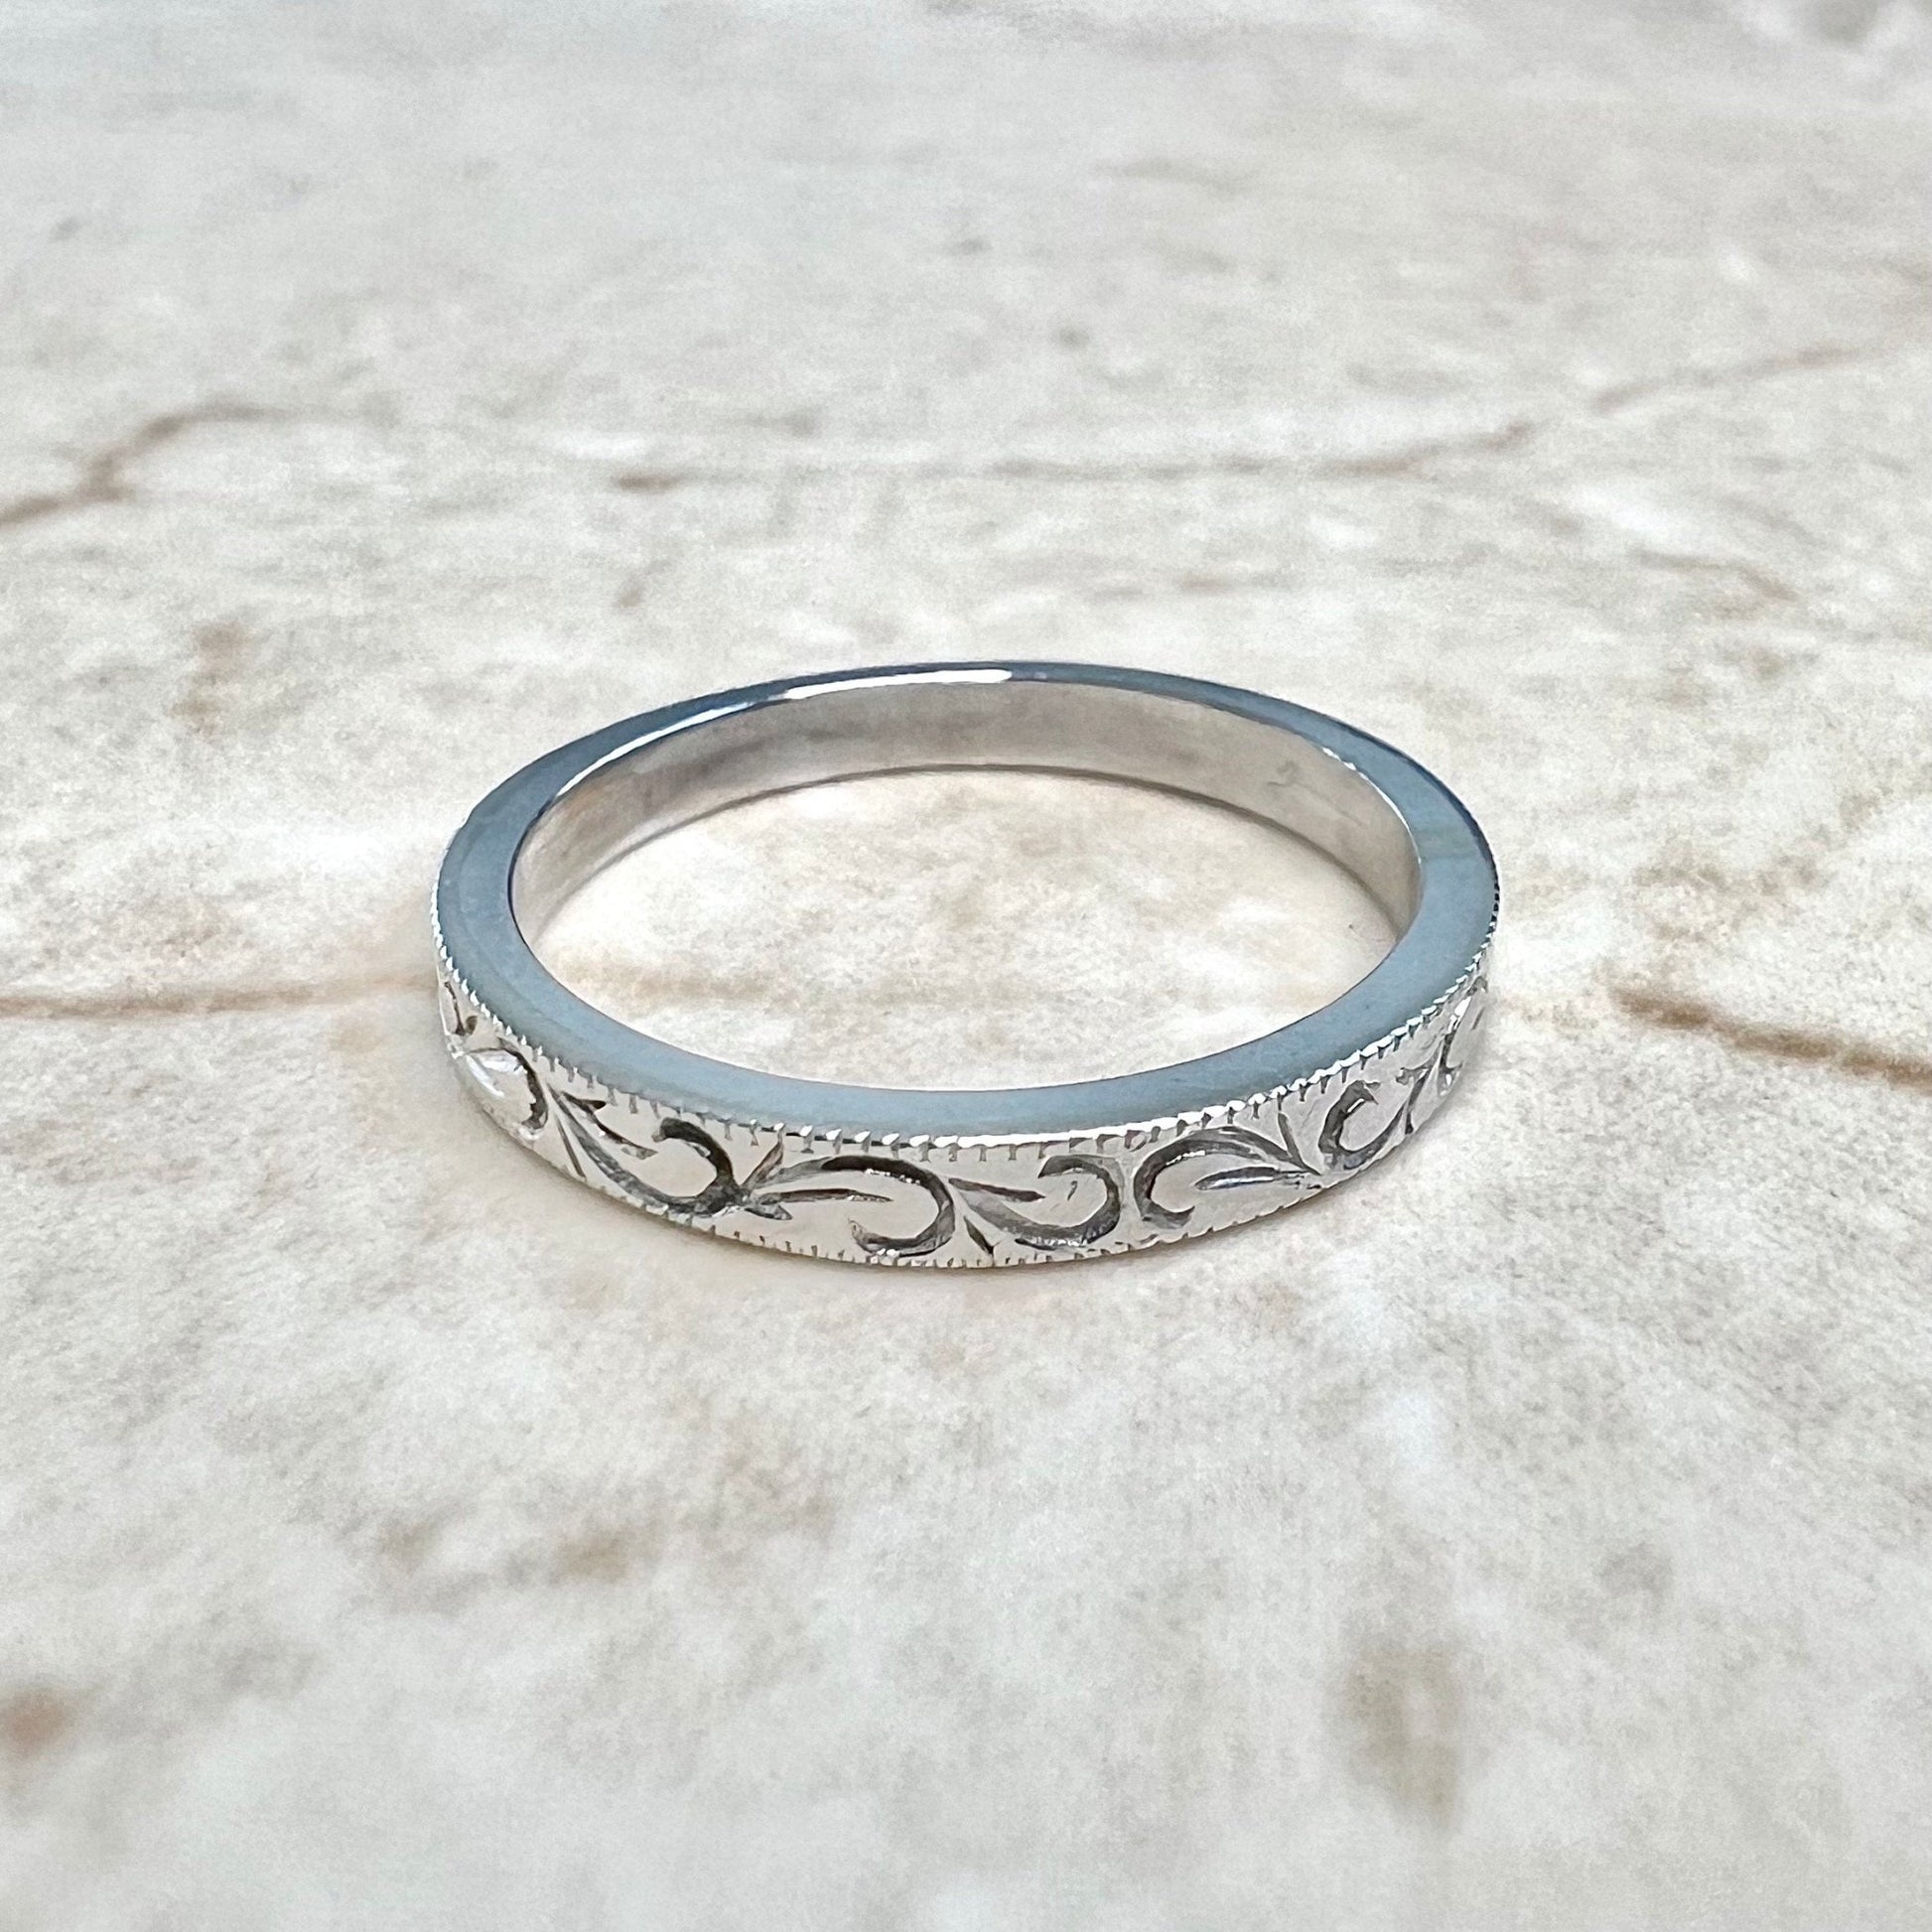 14K Antique Wedding Band Ring - Edwardian White Gold Wedding Ring - Engraved White Gold Band - White Gold Wedding Ring - Best Gifts For Her